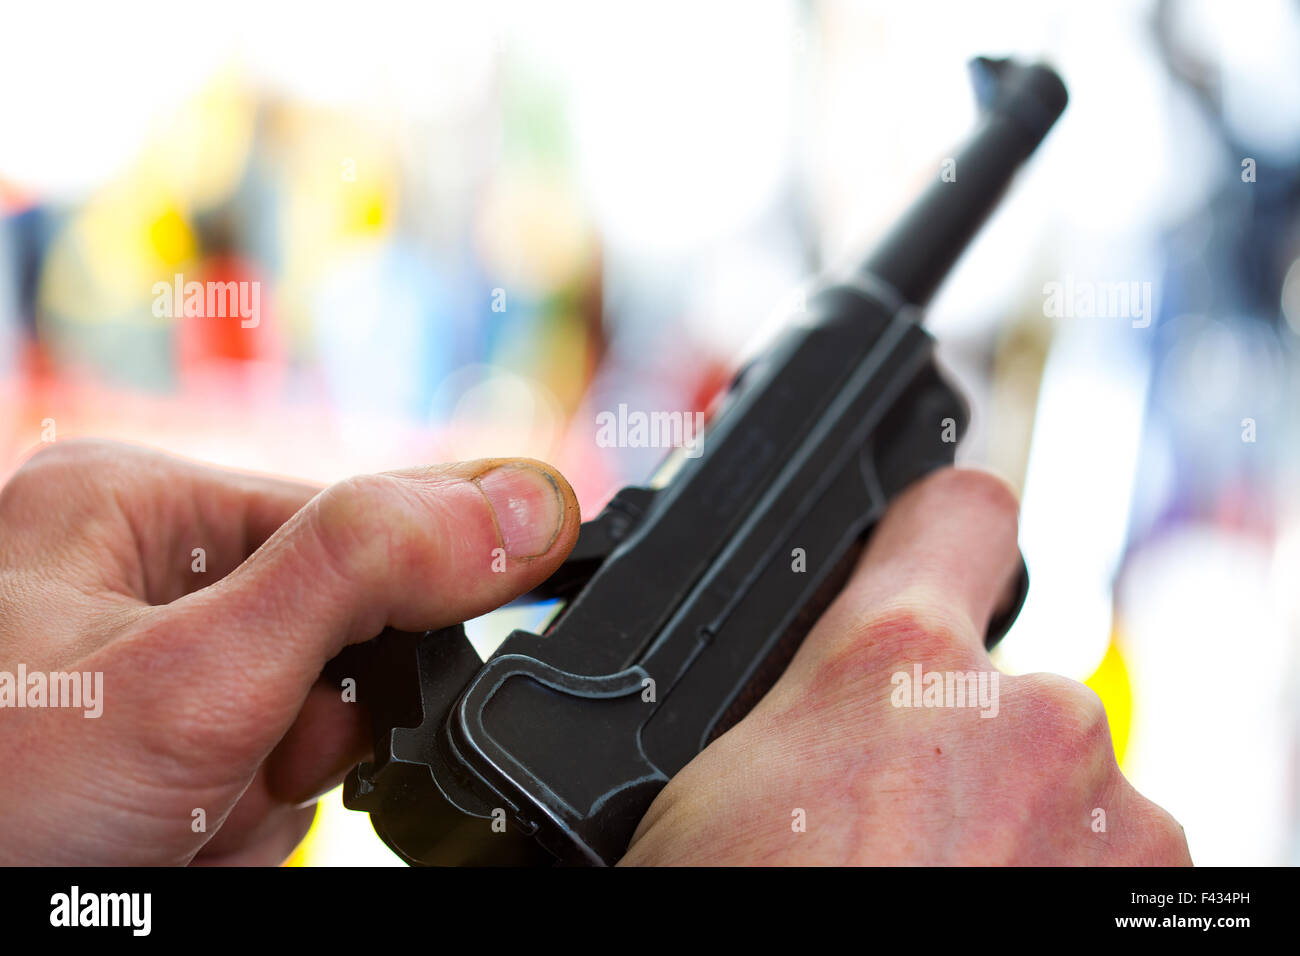 Luger automatic pistol in a human hand Stock Photo